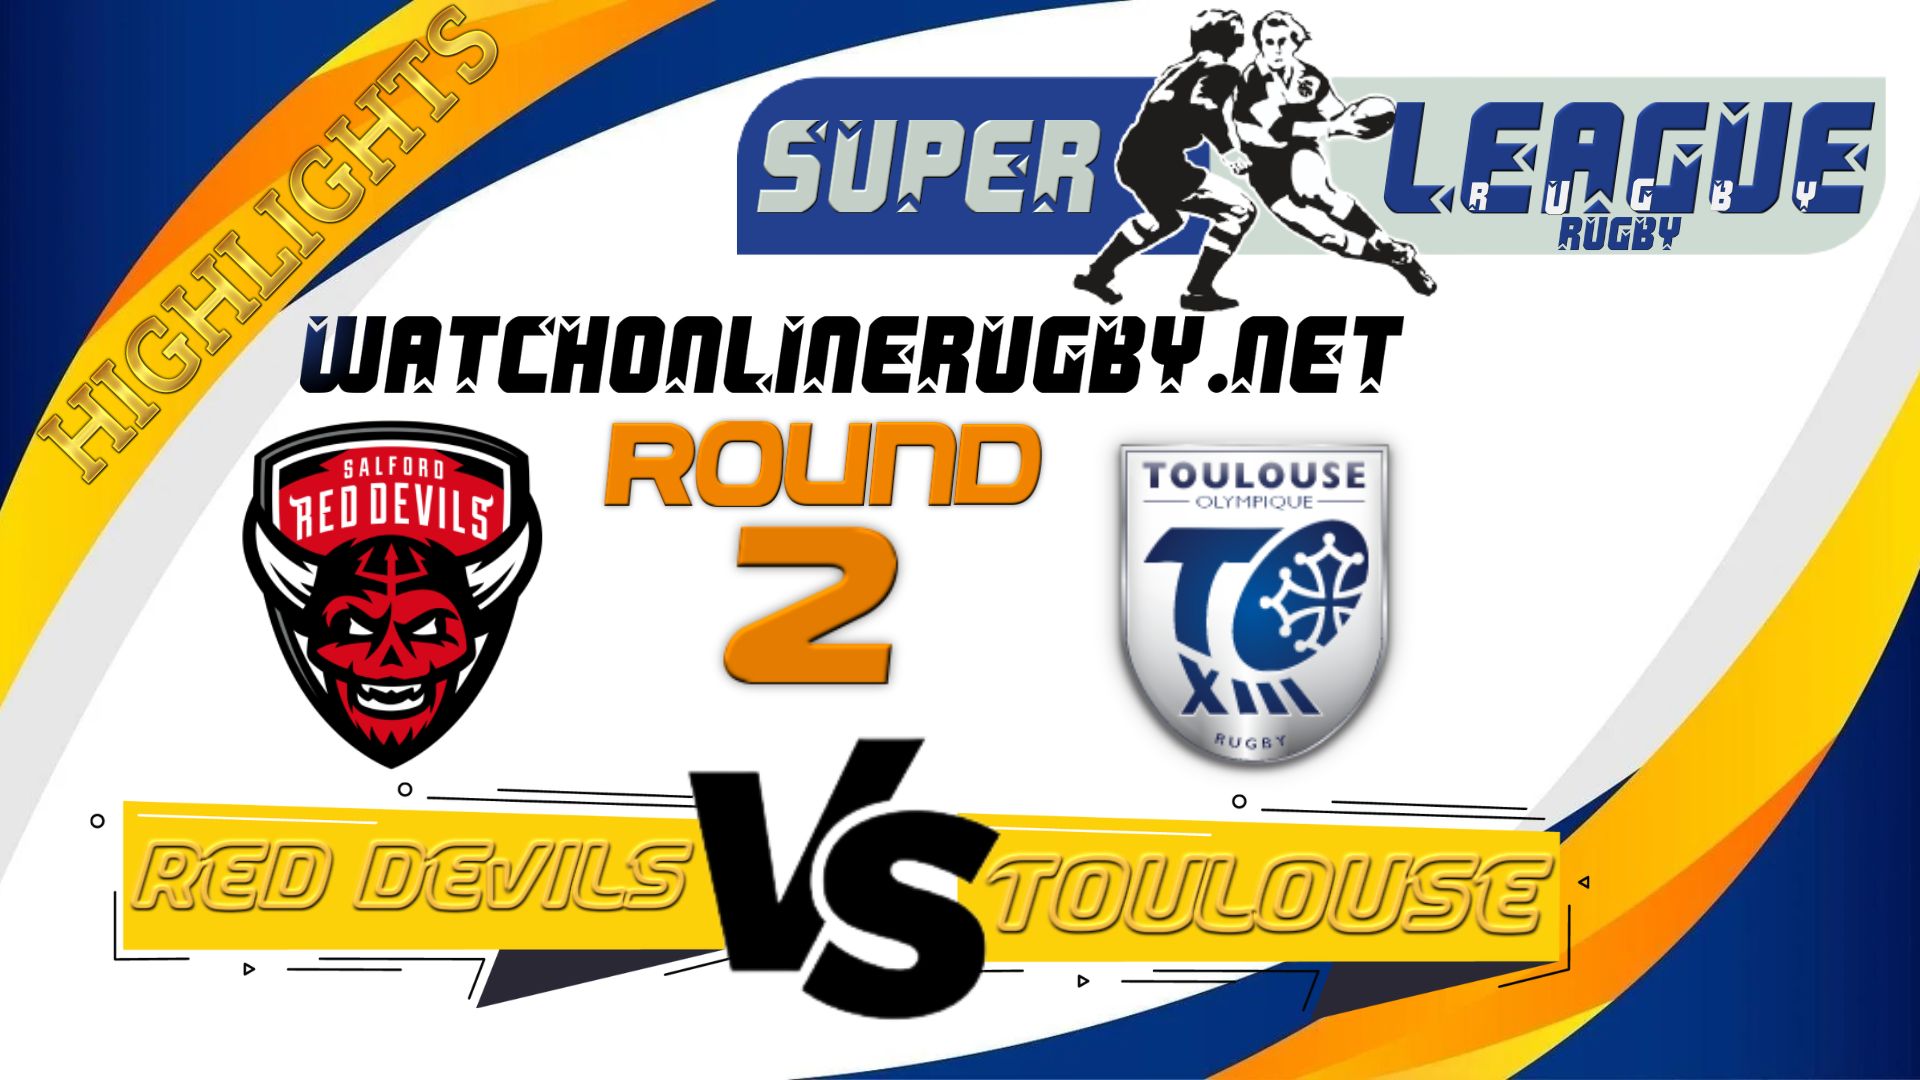 Salford Red Devils Vs Toulouse Super League Rugby 2022 RD 2